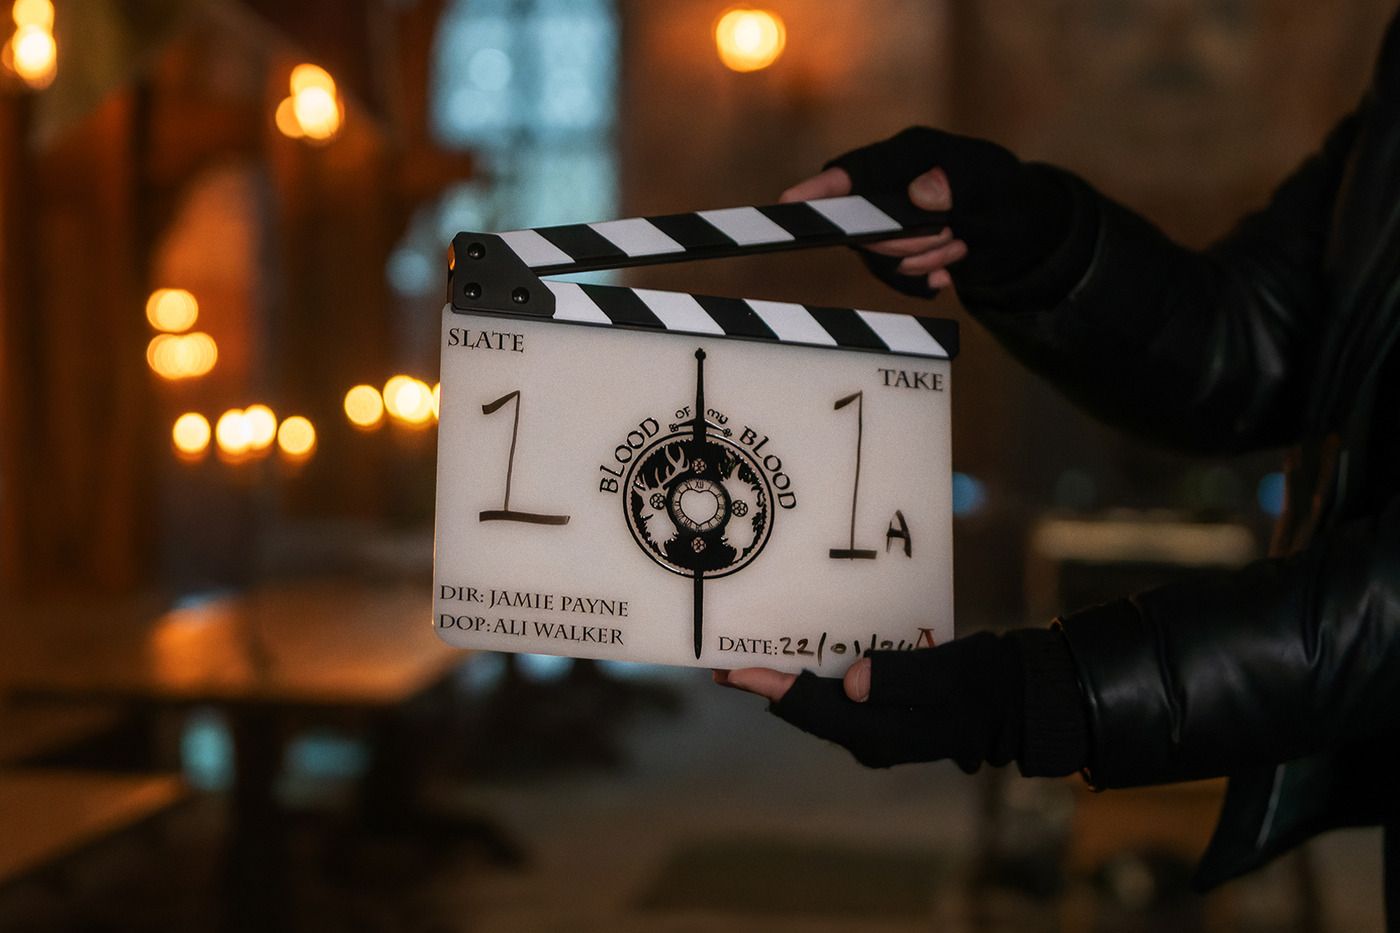 'Outlander: Blood of My Blood' set image shows the clapperboard of the series.